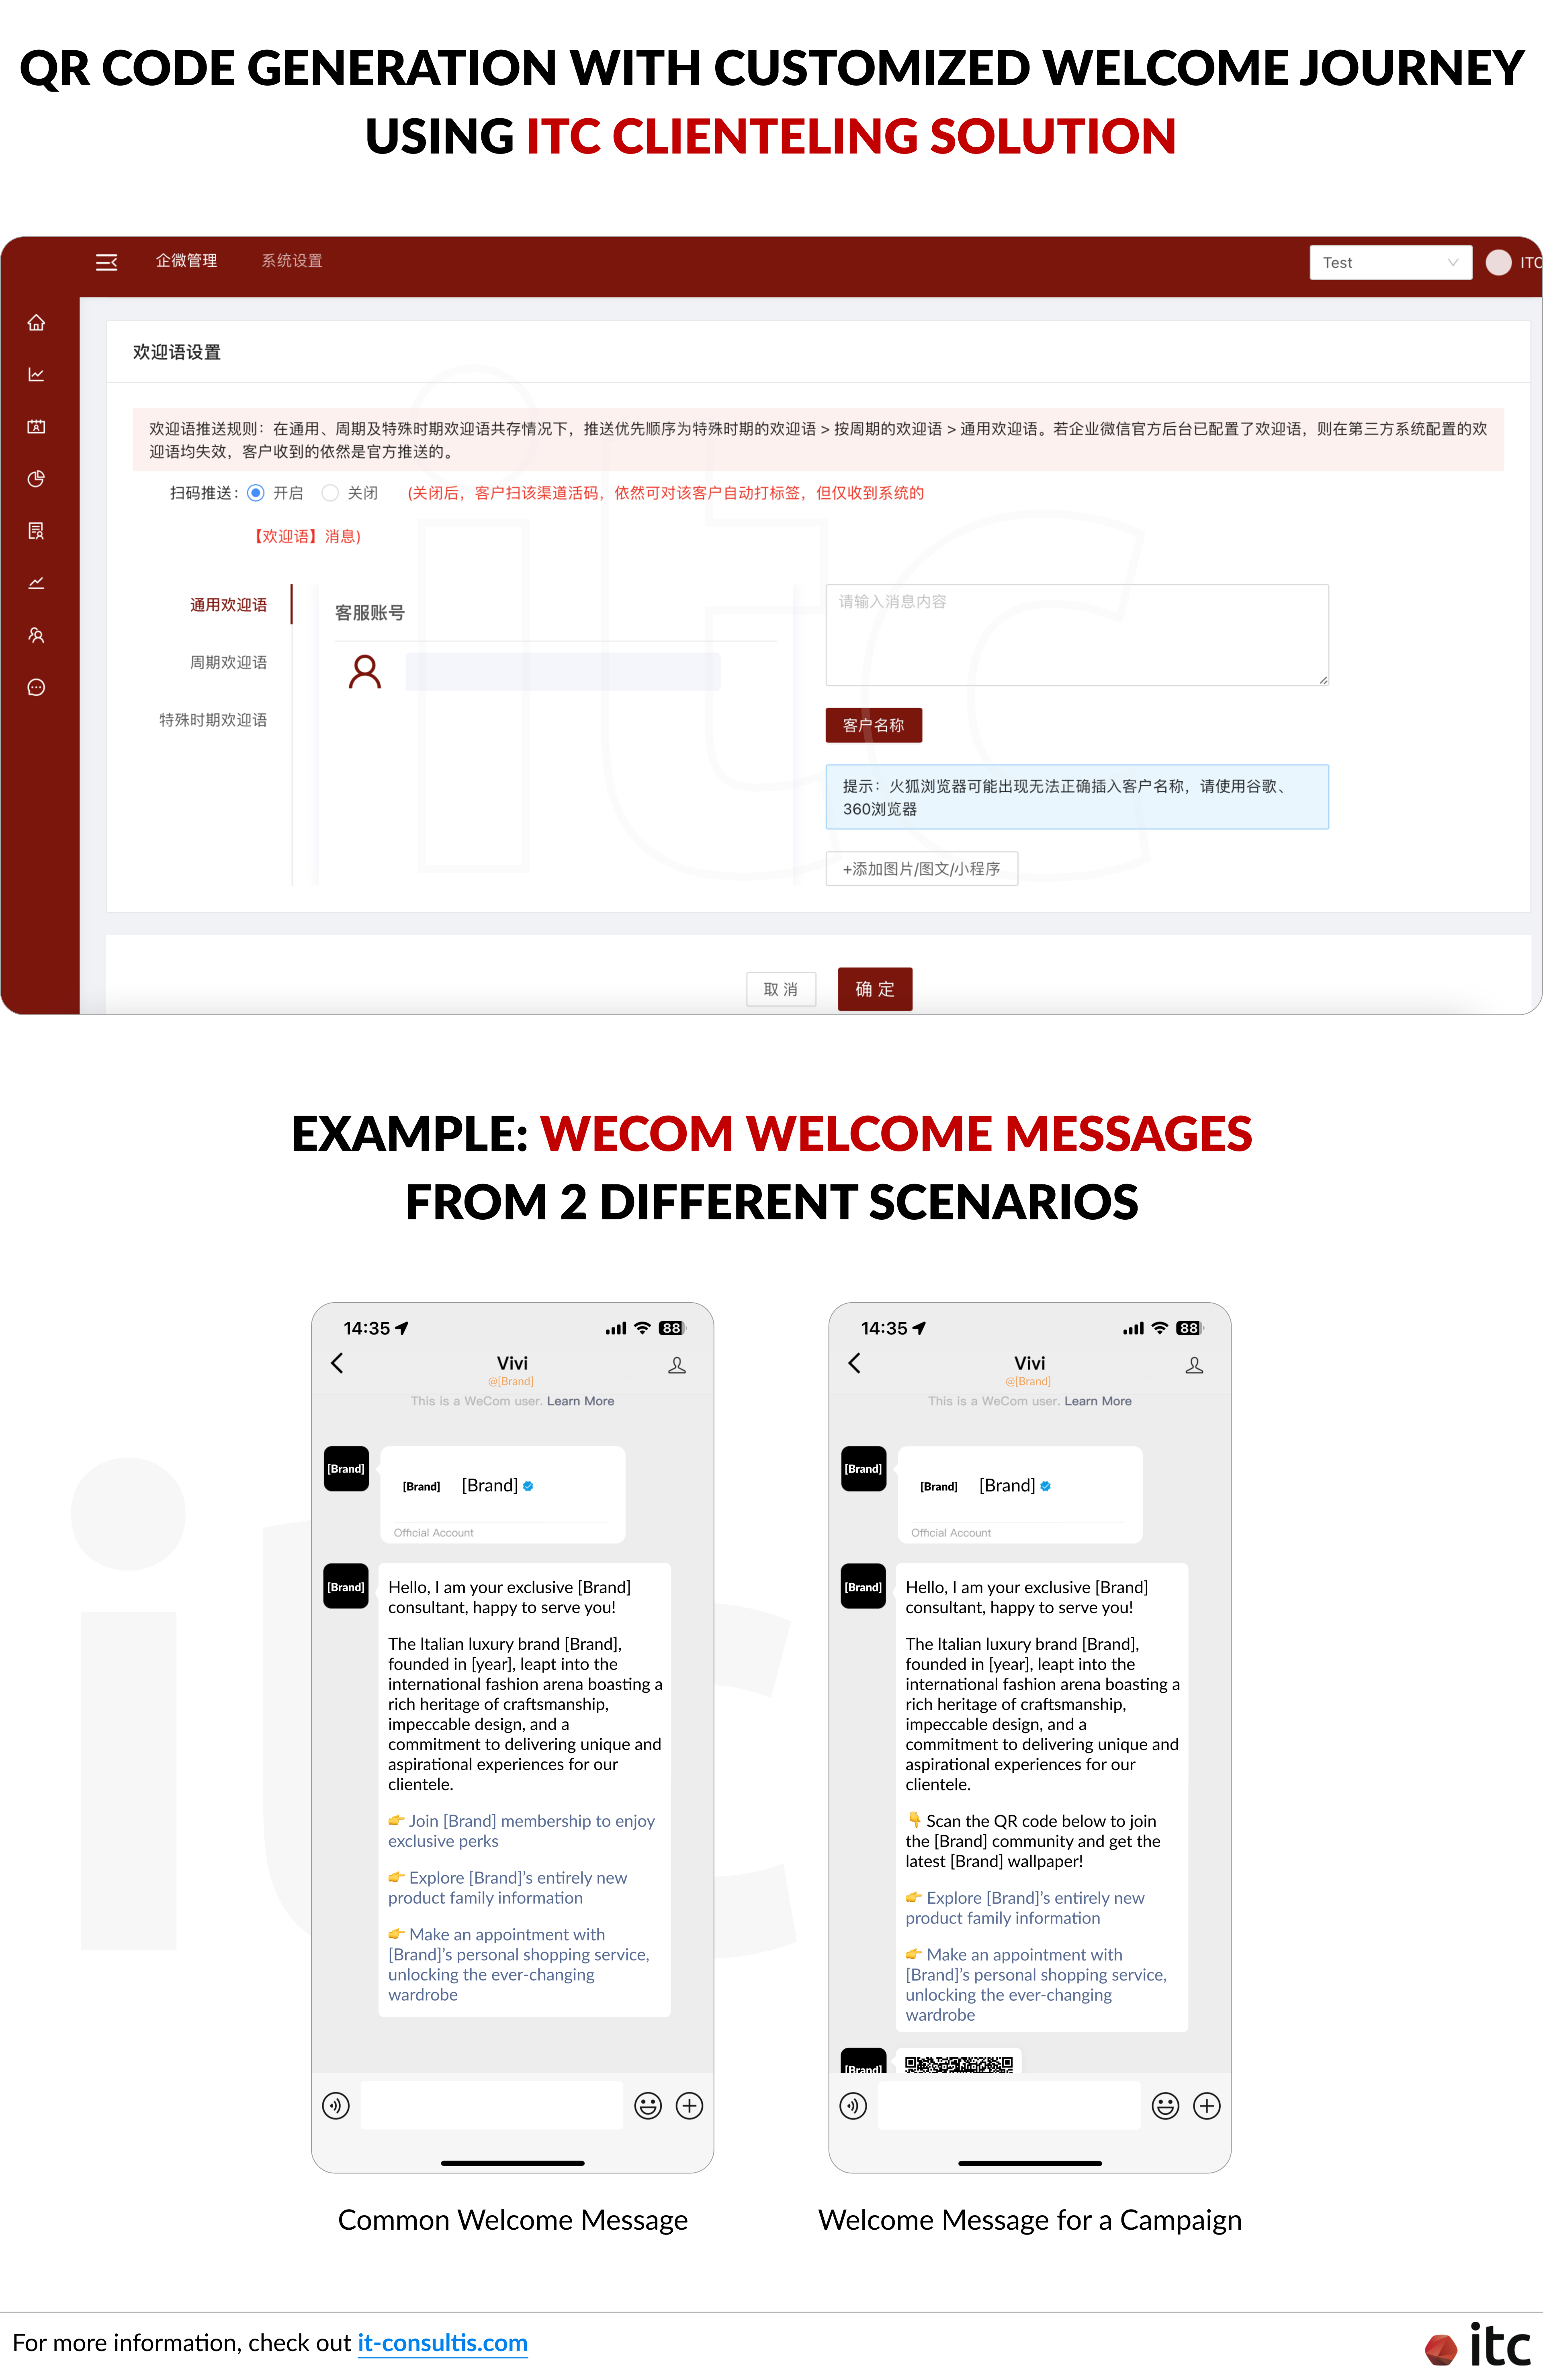 Parametric WeCom QR code generation with customized Welcome Journey using ITC Clienteling Solution and an example of WeCom Welcome Messages from 2 different scenarios